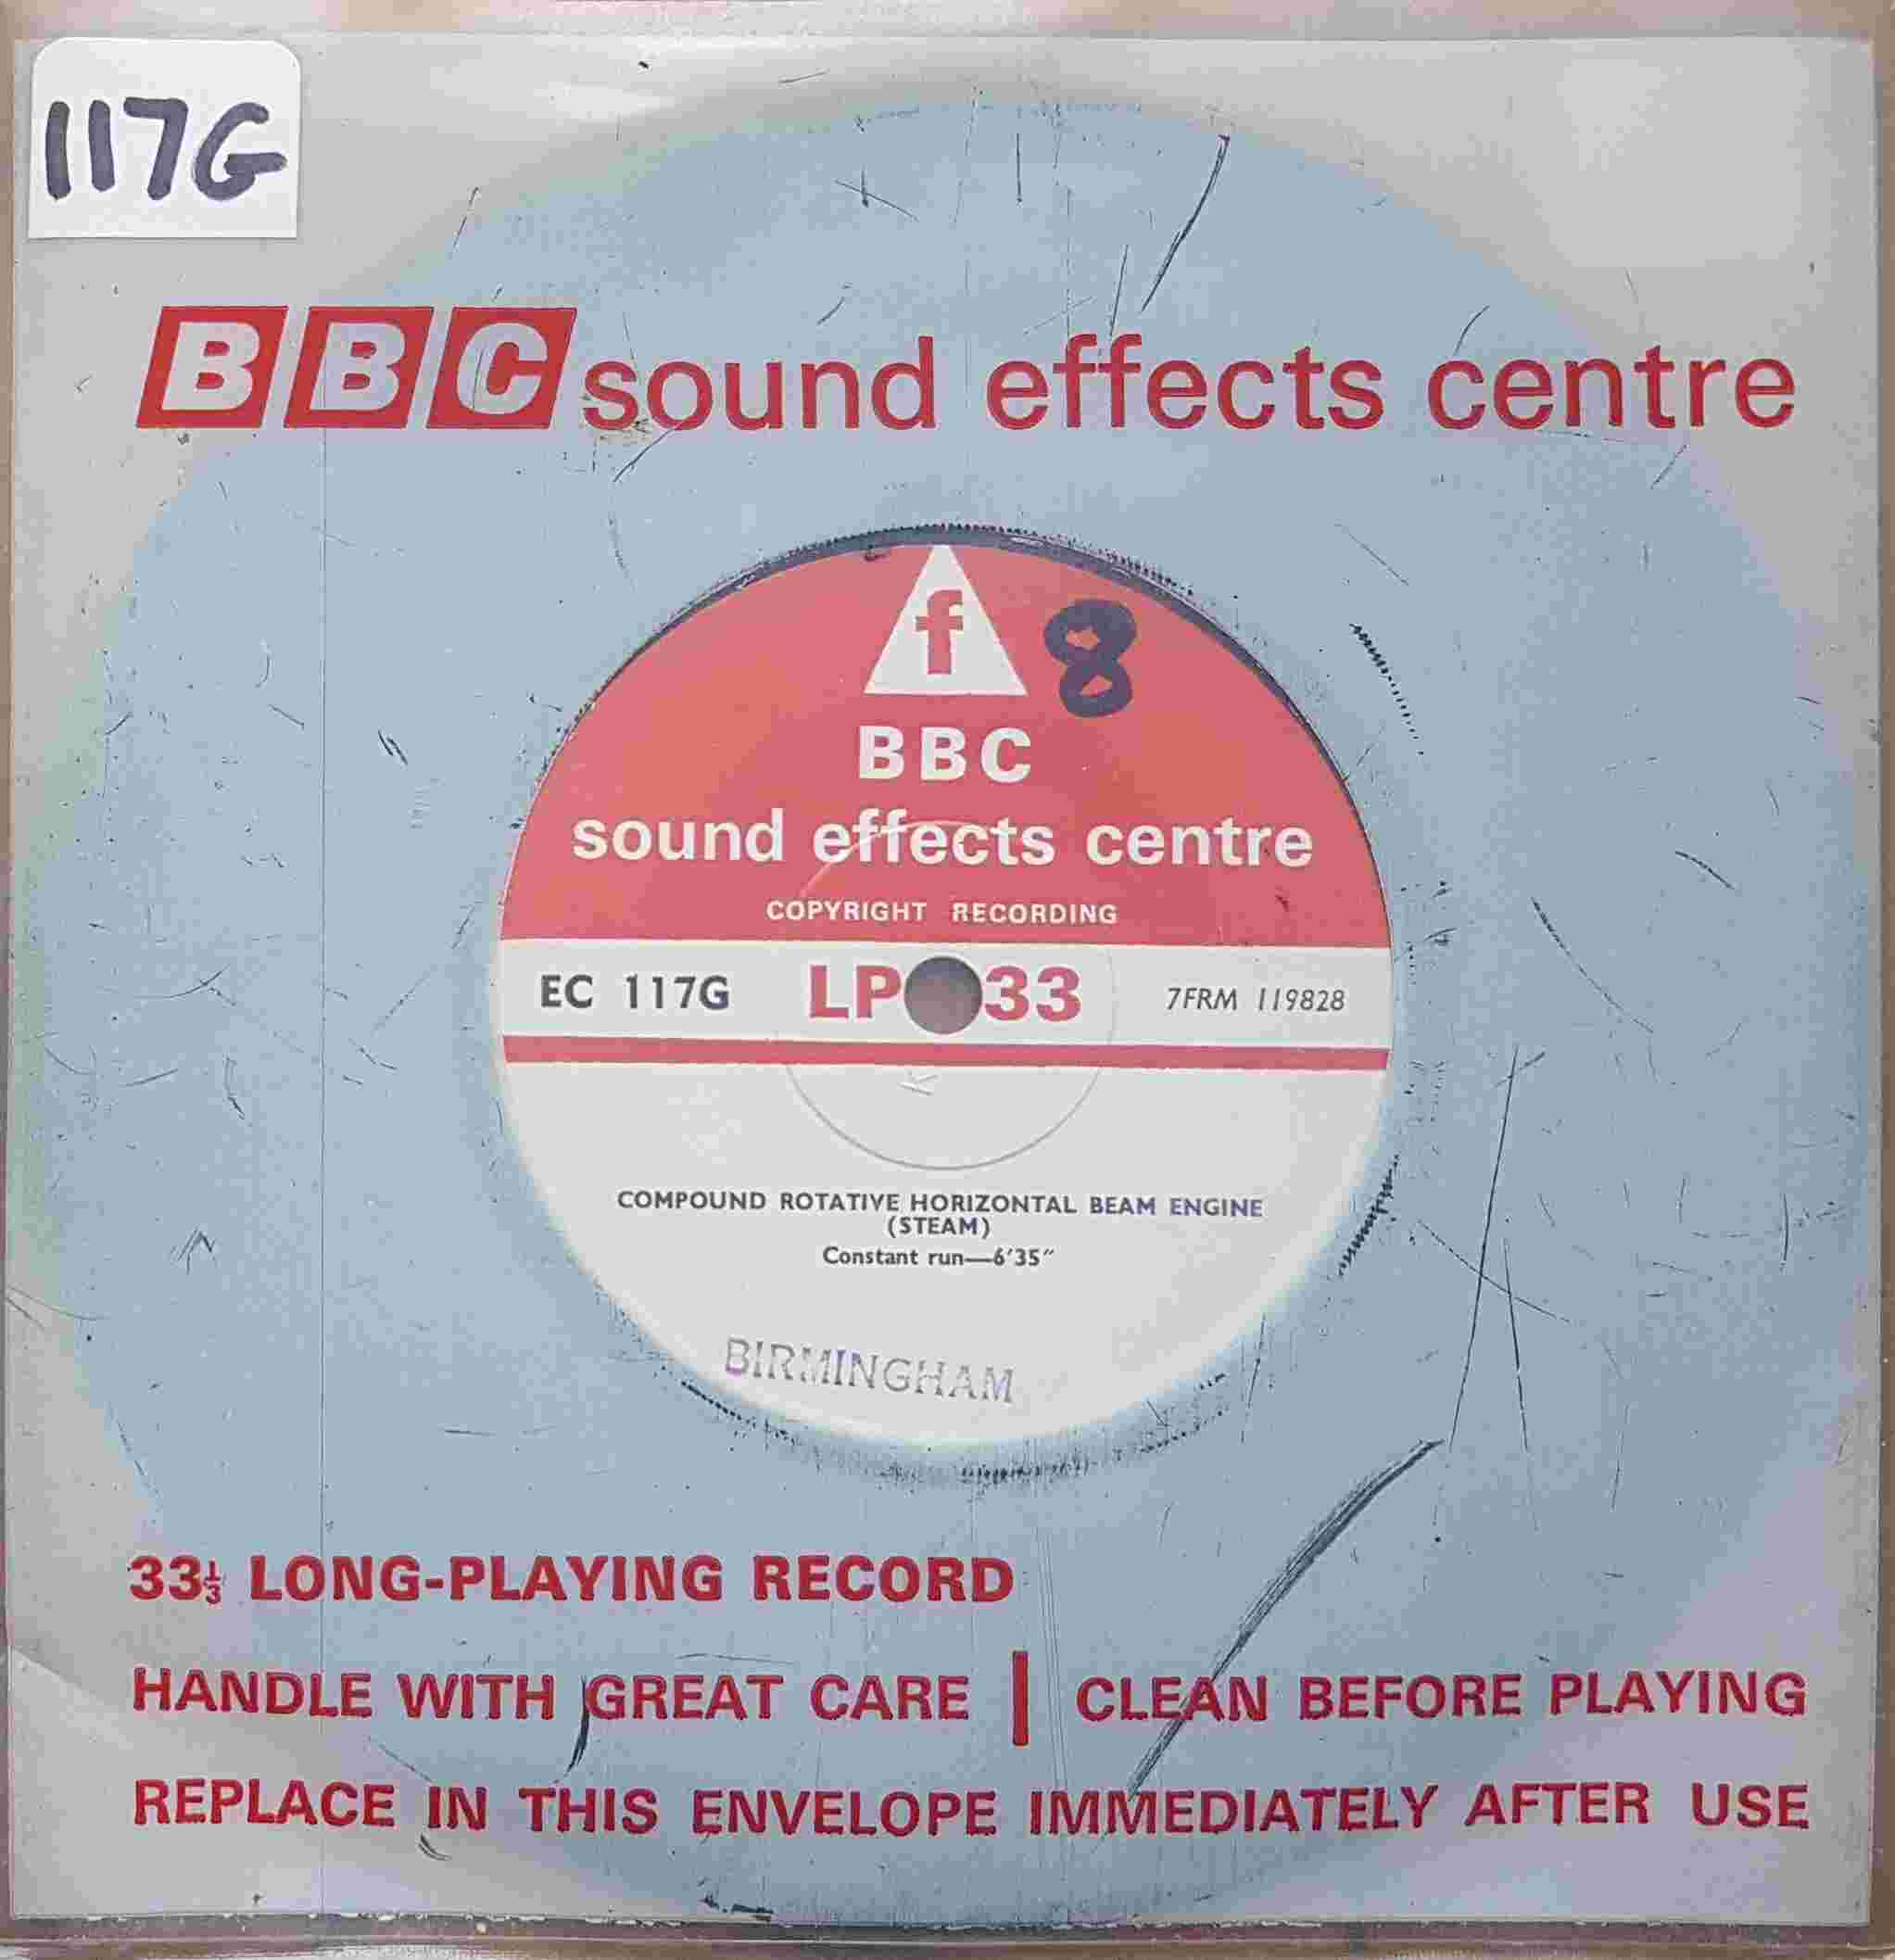 Picture of EC 117G Compound rotative beam engine (Steam) by artist Not registered from the BBC singles - Records and Tapes library